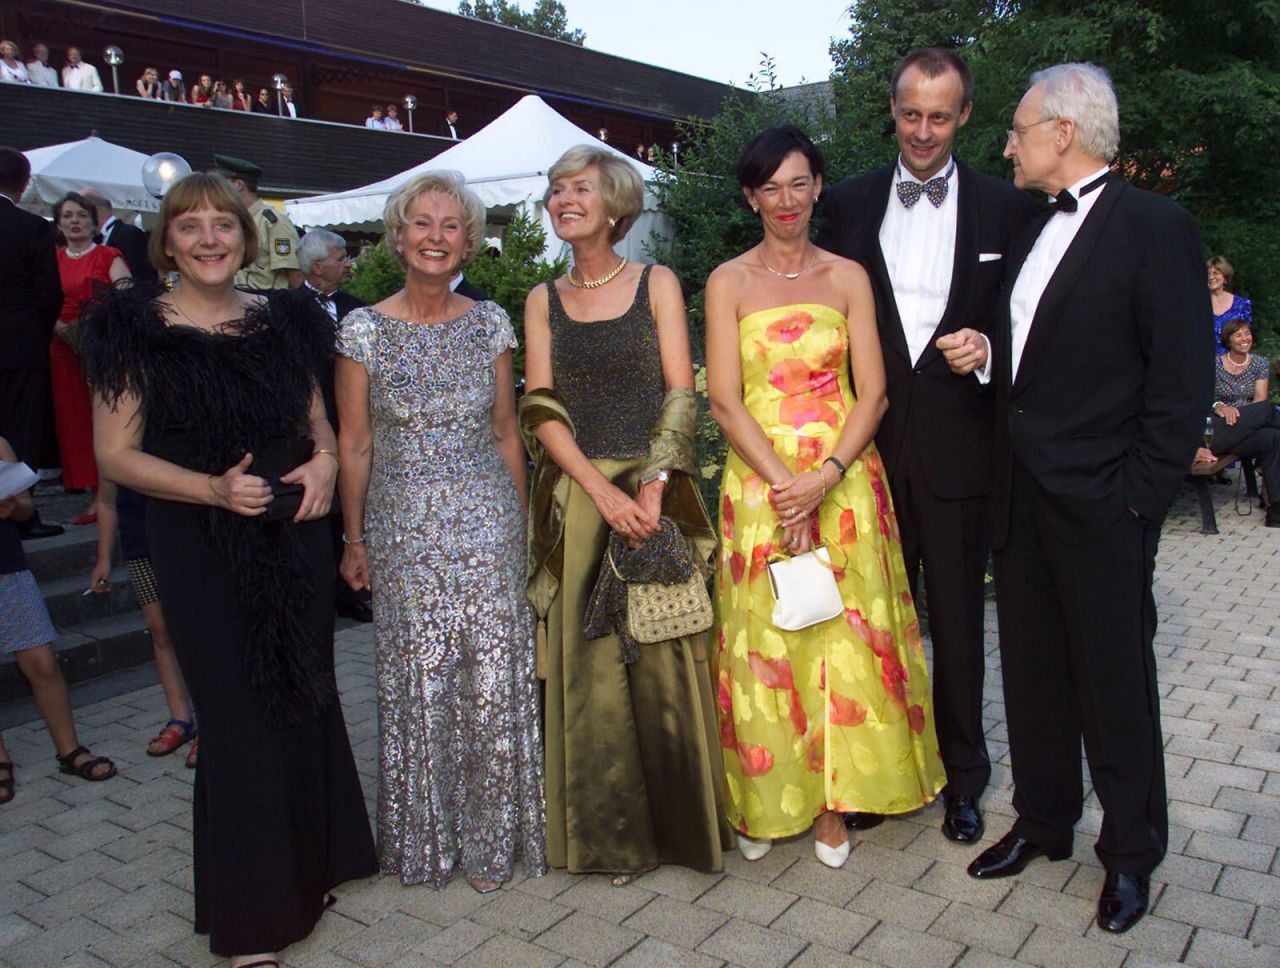 Merkel, left, attends the opening of the Wagner Festival, an annual music festival in Bayreuth, Germany, in 2001.